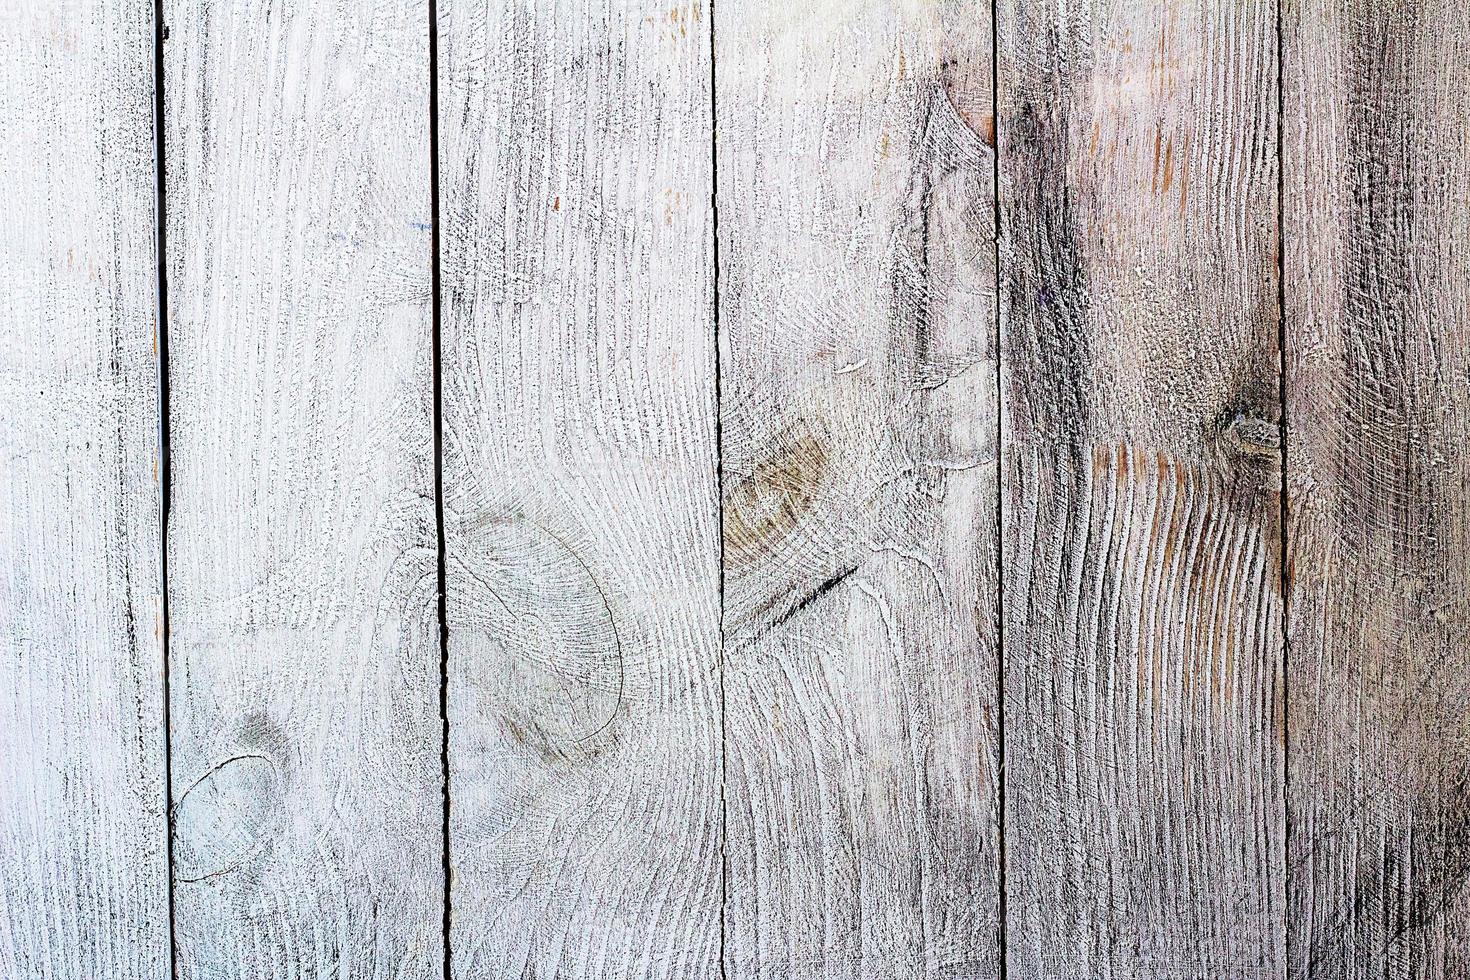 Vintage white wood background texture with knots and nail holes. Old painted wood wall. Brown abstract background. Vintage wooden dark horizontal boards. Front view with copy space photo